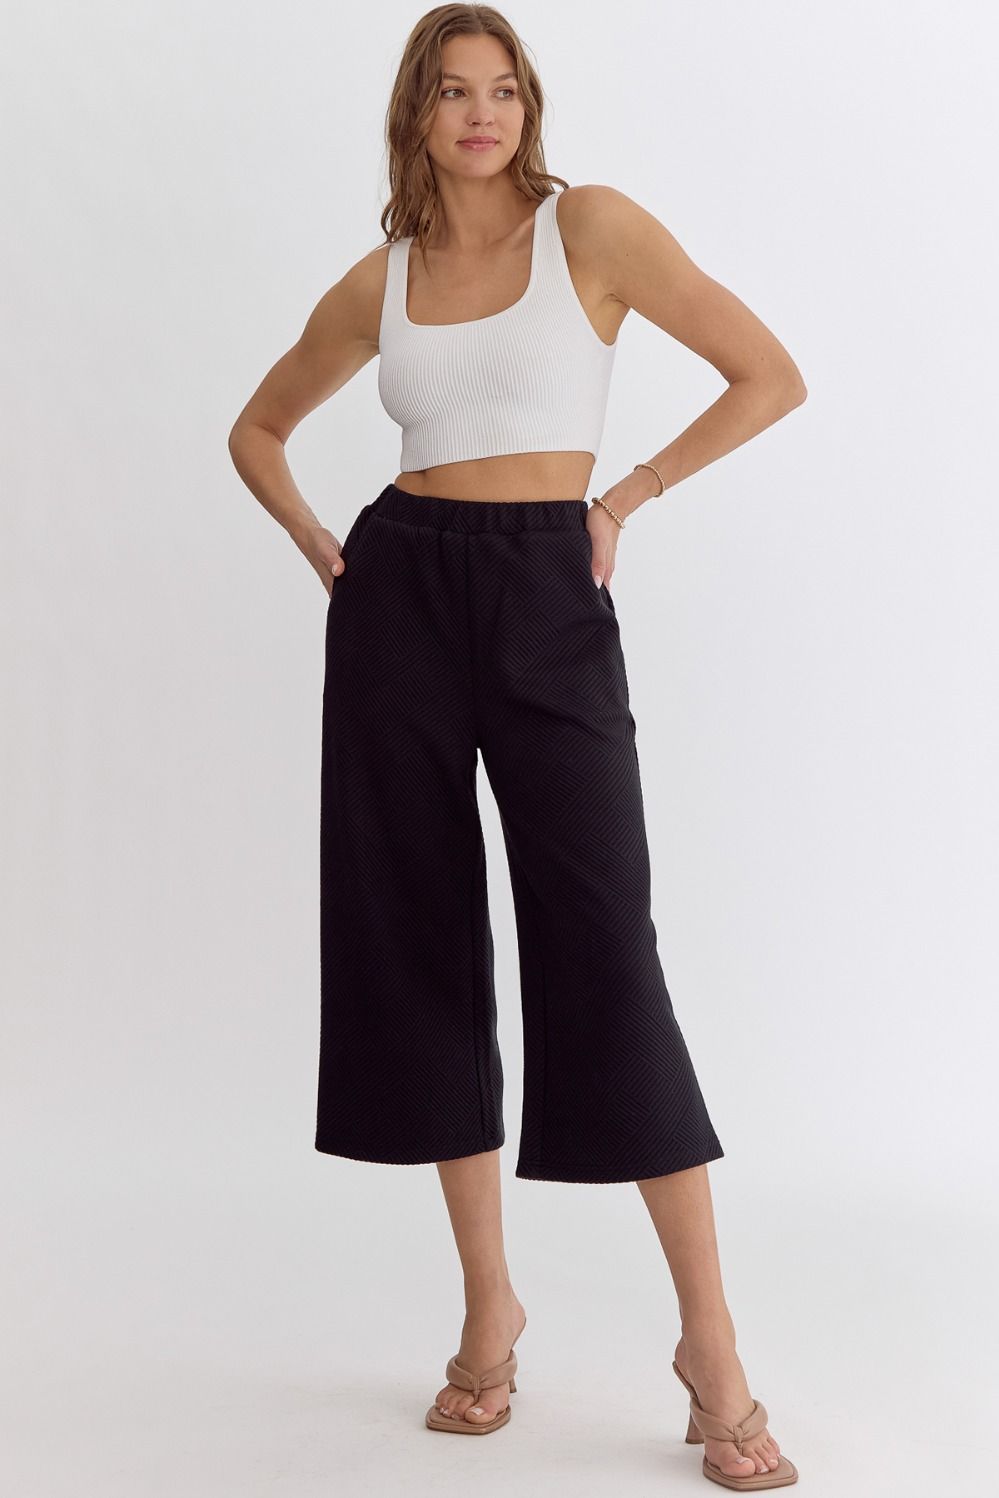 Gracie Textured Cropped Knit Pants FINAL SALE